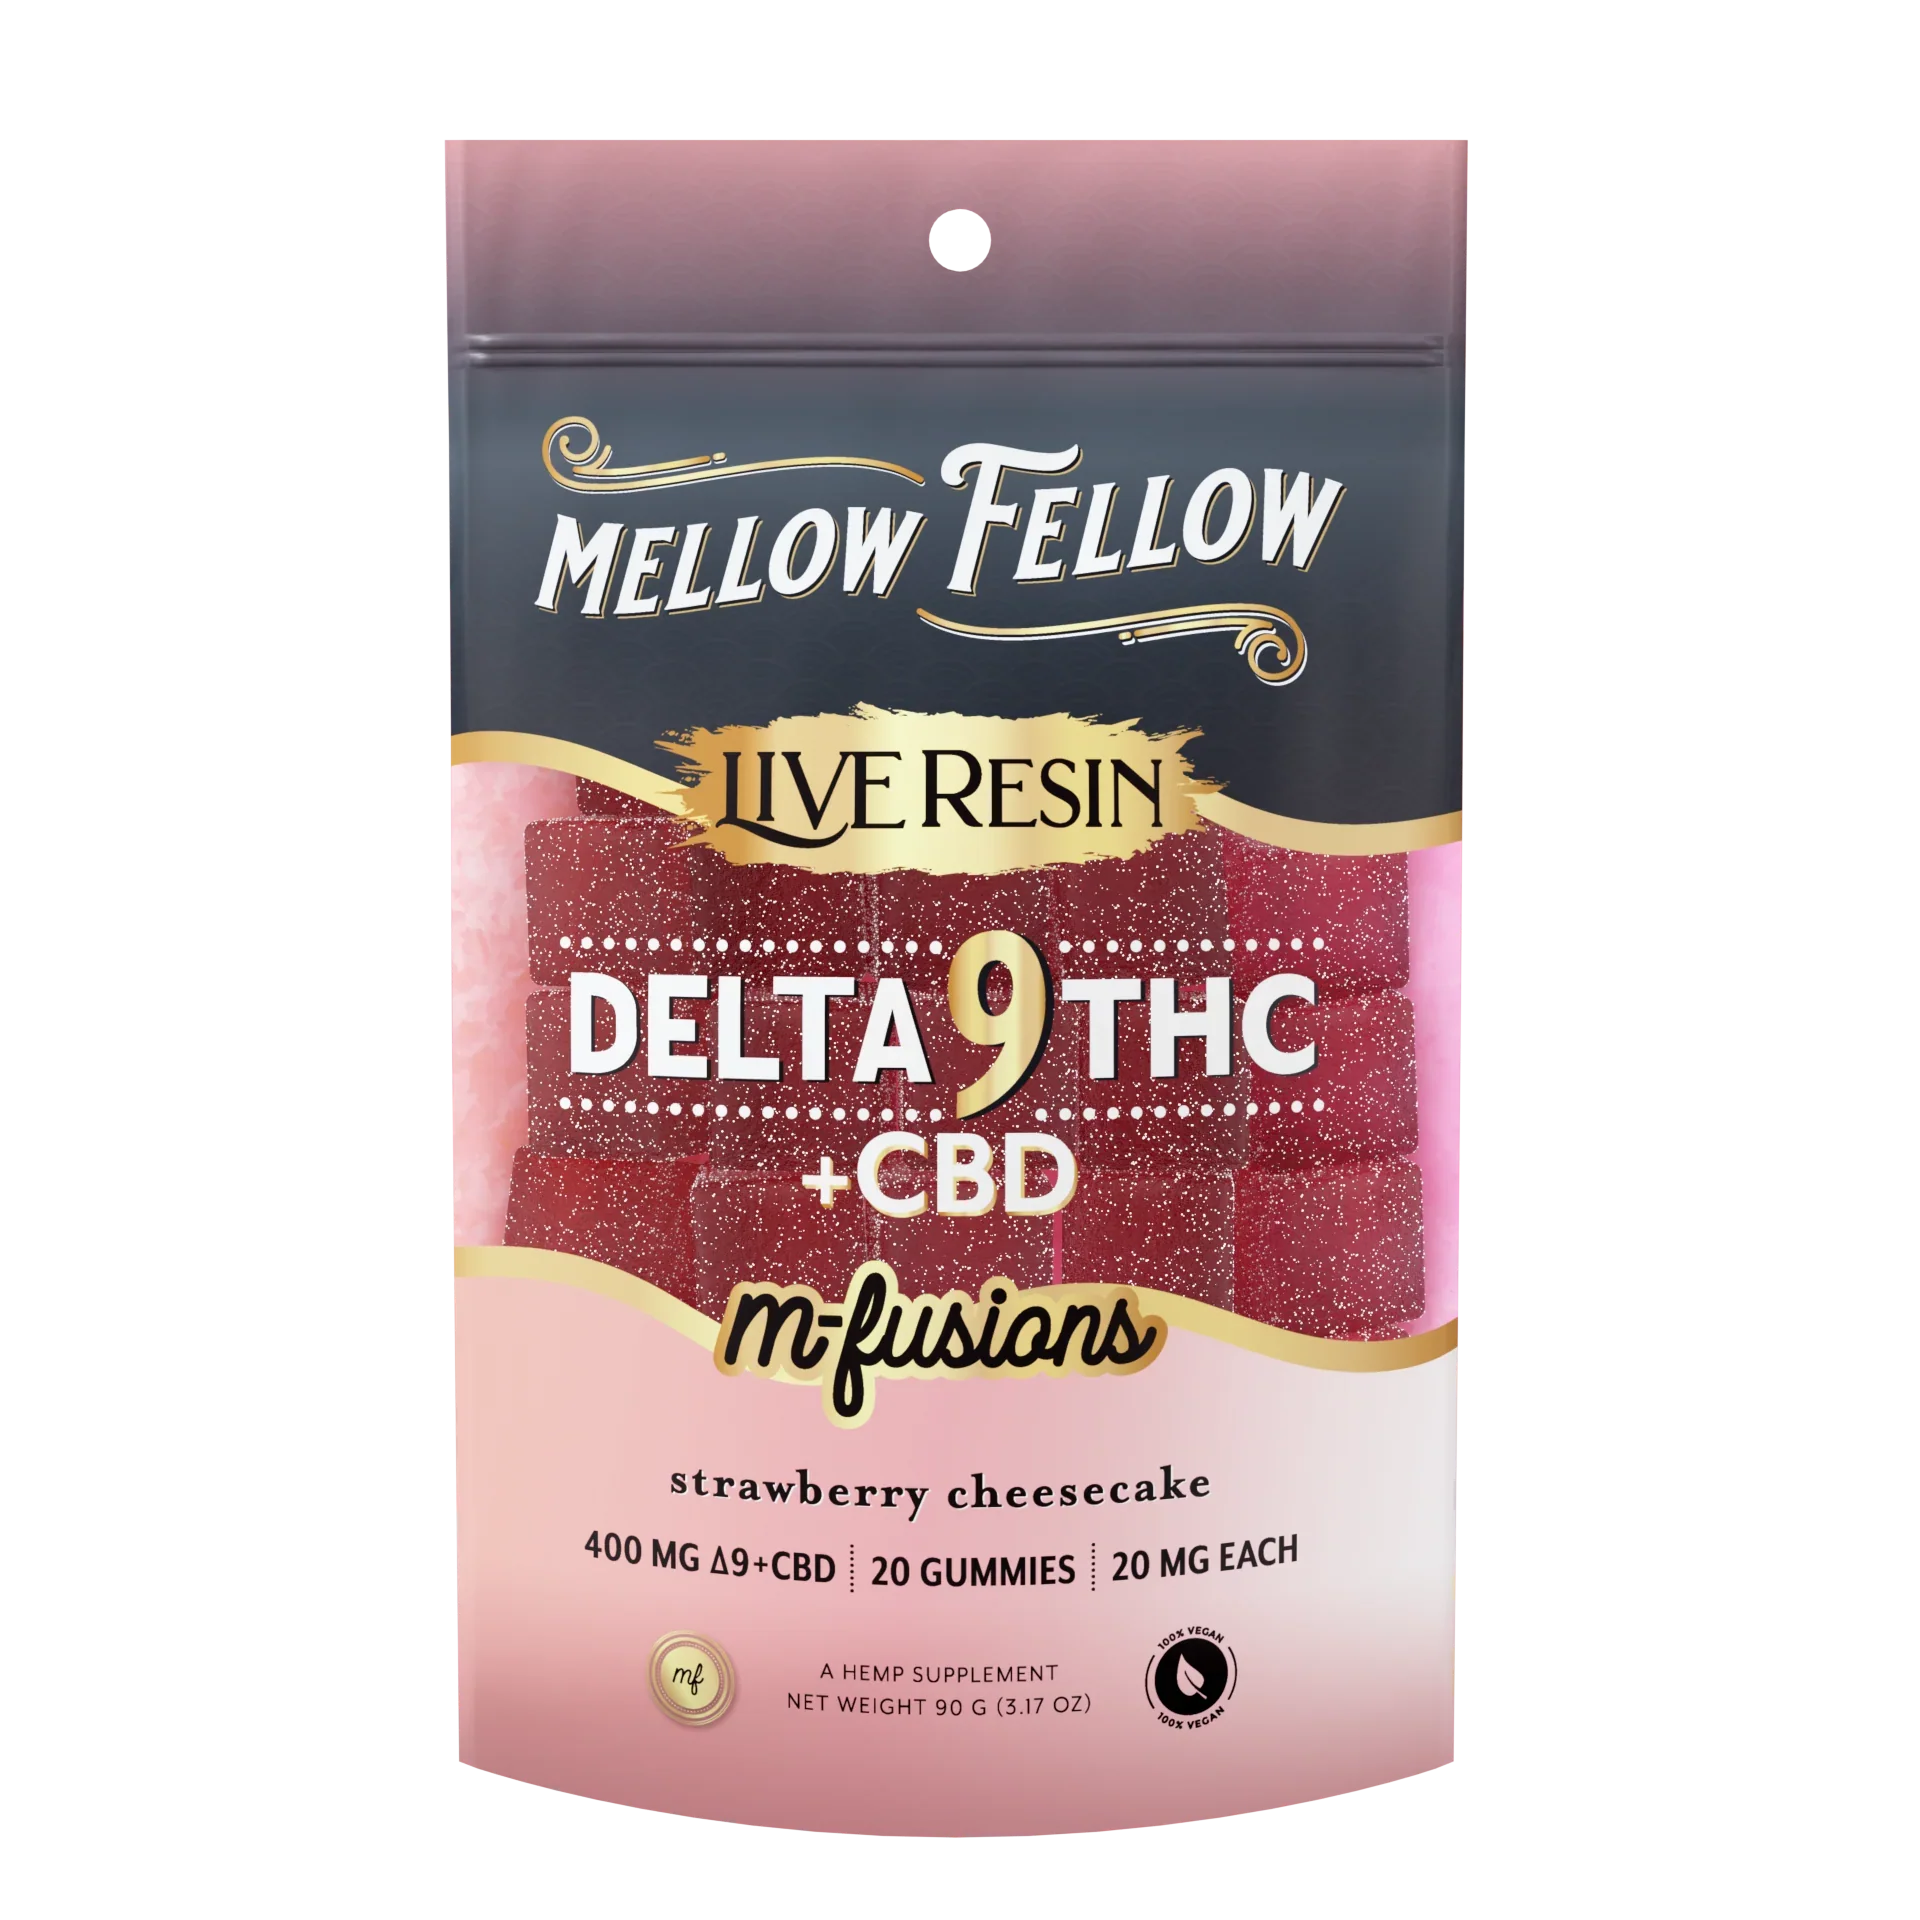 Mellow Fellow Delta 9 Live Resin Edibles 400mg - Strawberry Cheesecake Best Price